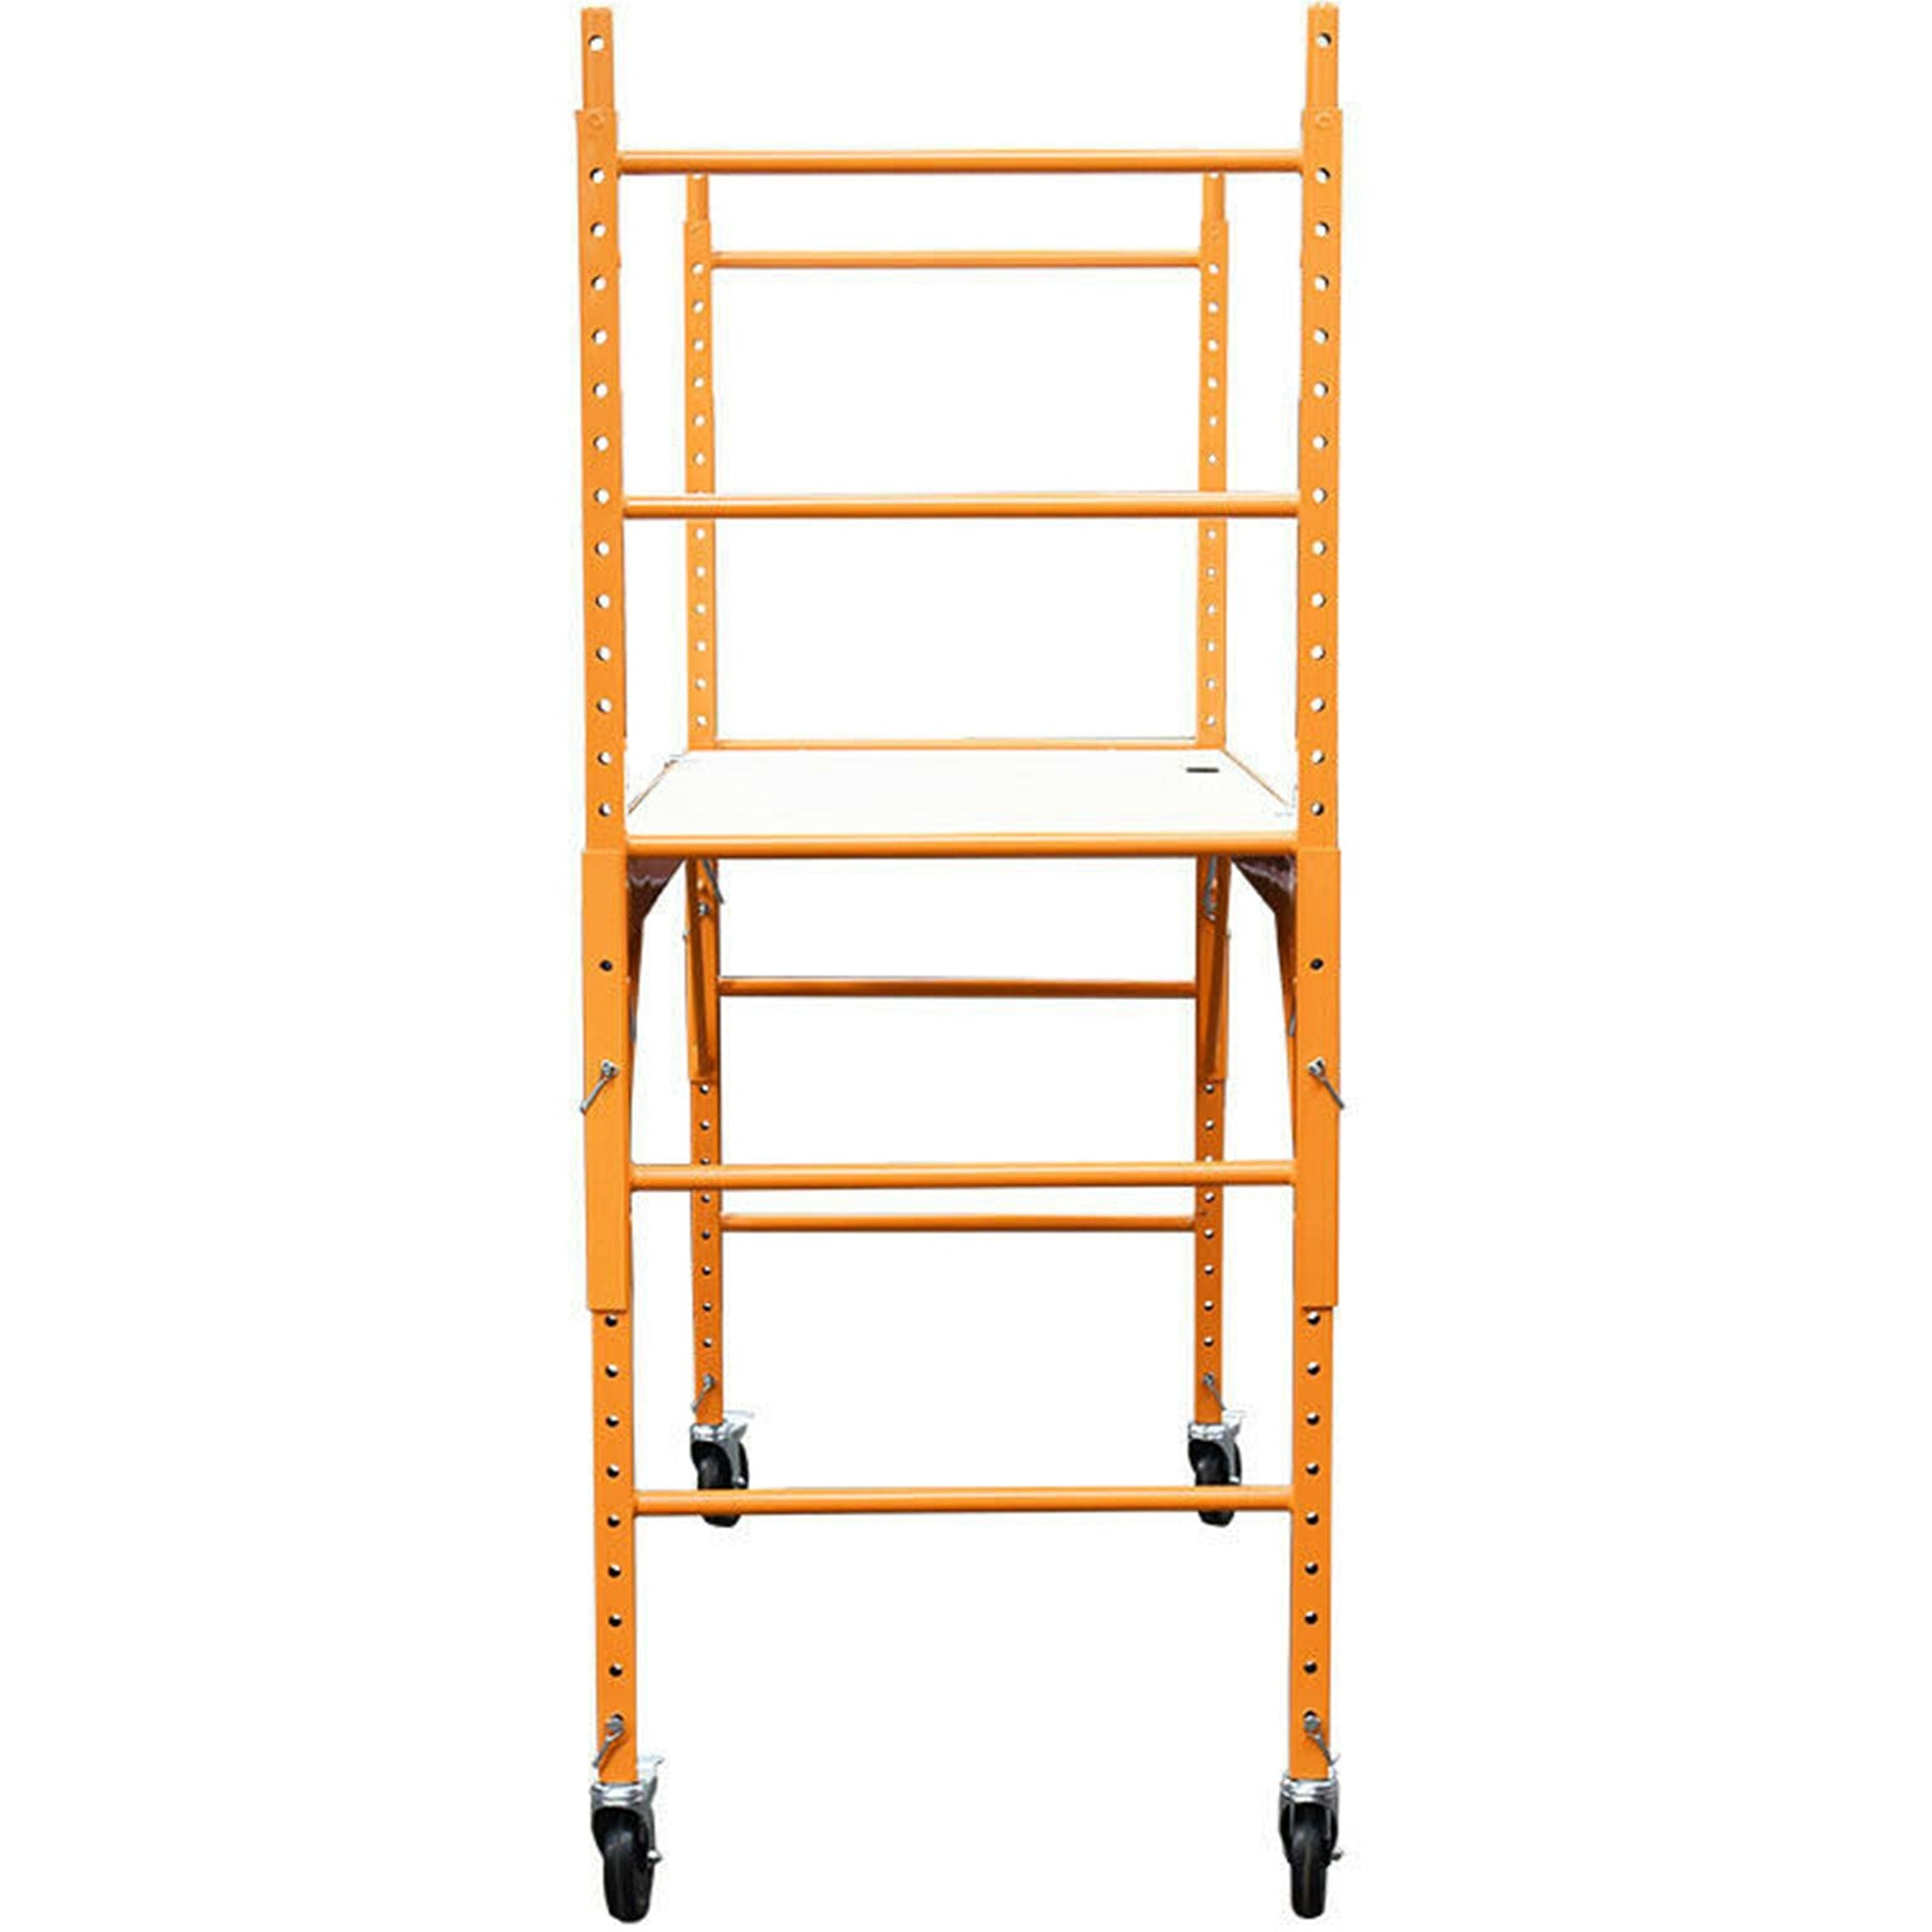 The heavy-duty steel frame, along with sturdy castor wheels with brakes, make it stable and comfortable to work from